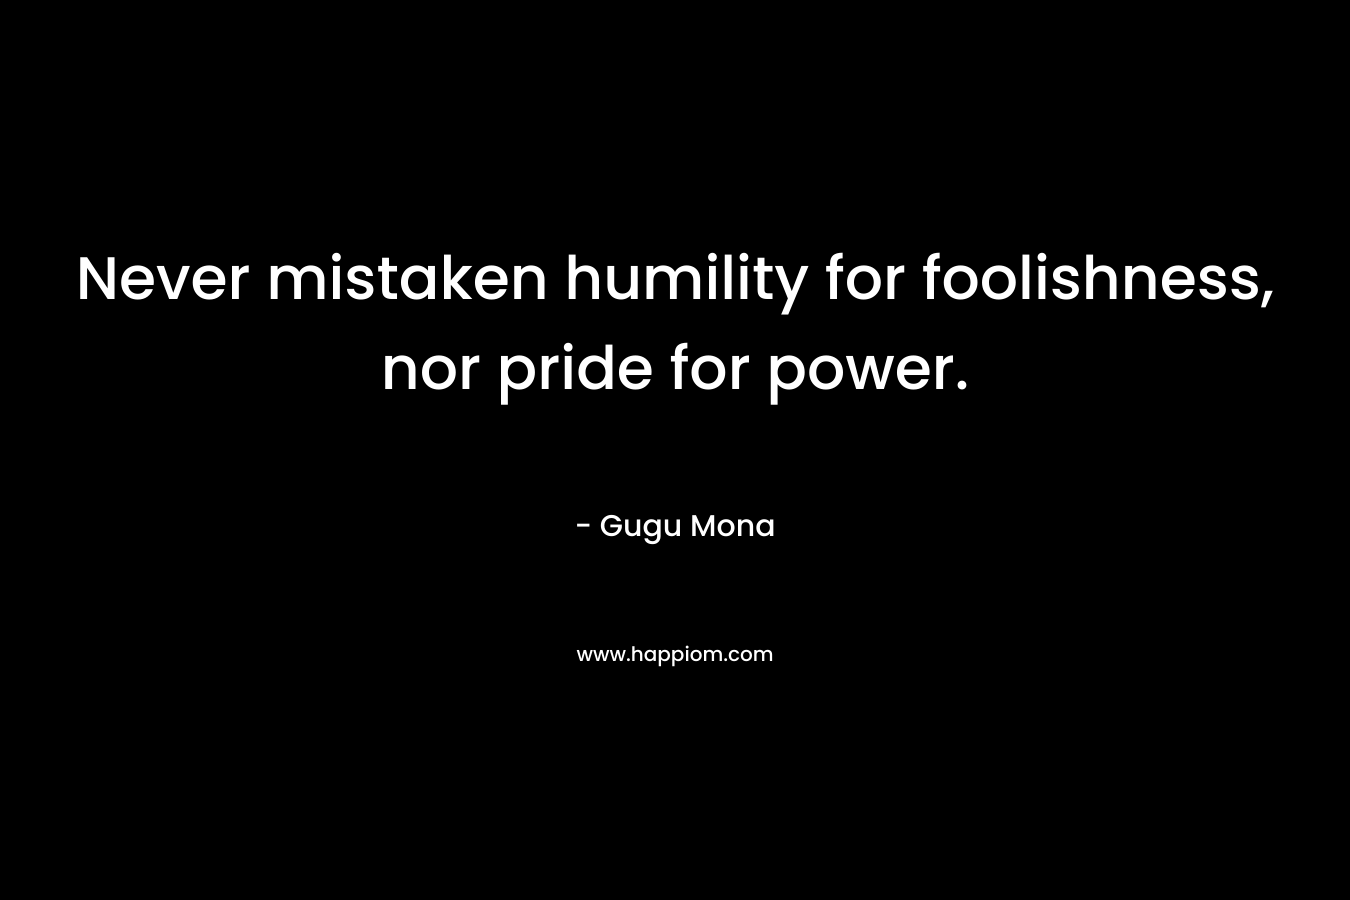 Never mistaken humility for foolishness, nor pride for power.